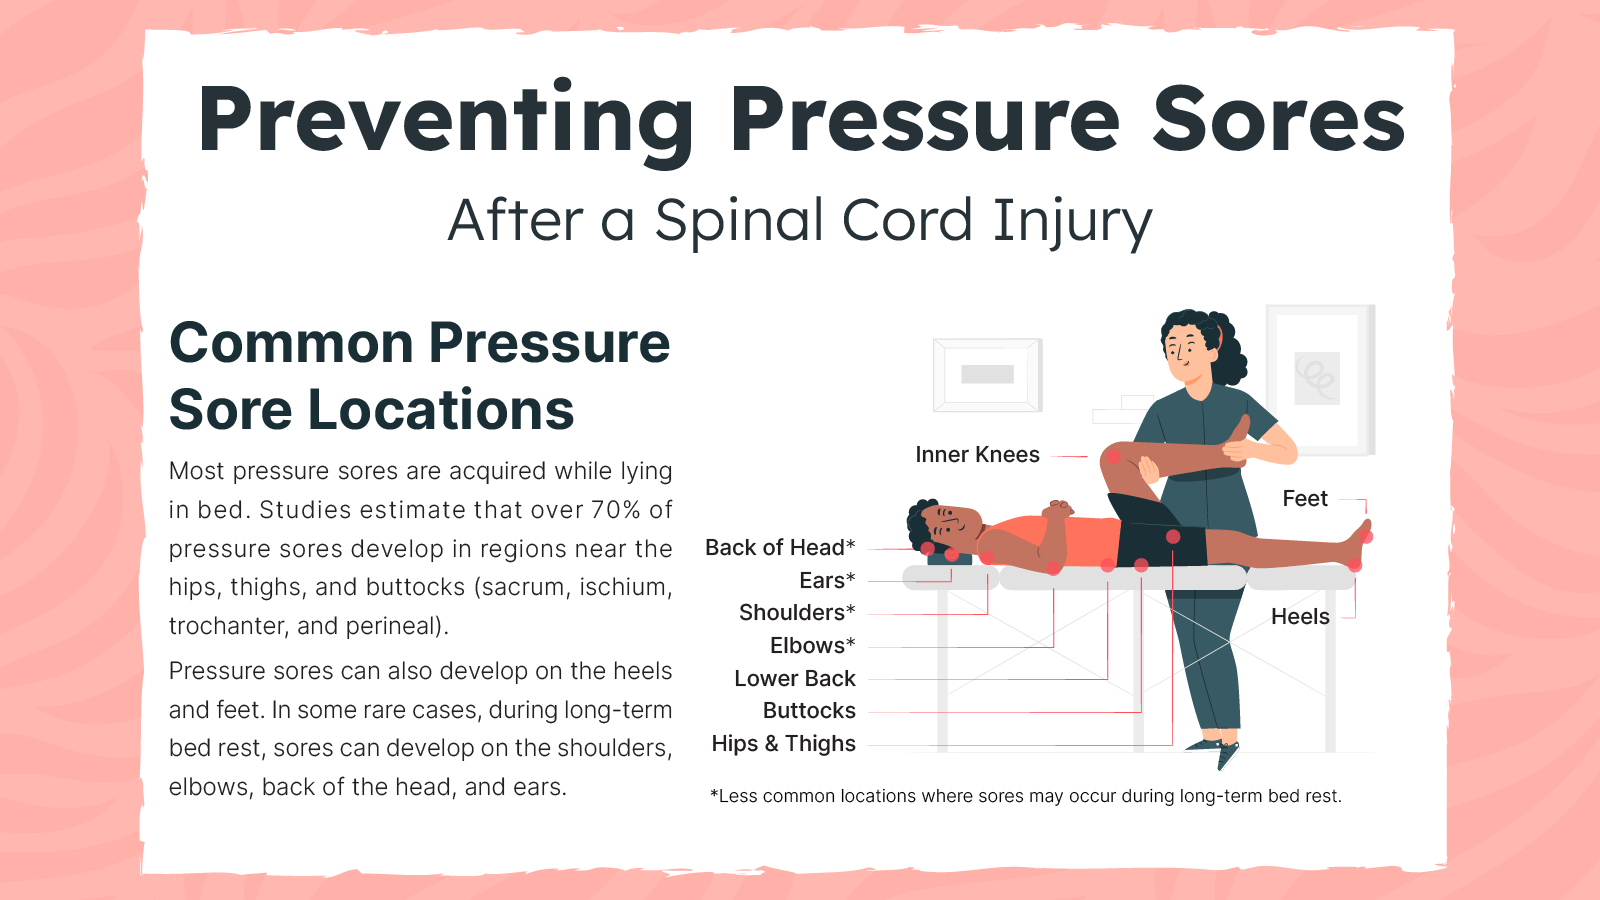 How to Prevent Pressure Injuries - What You Need to Know